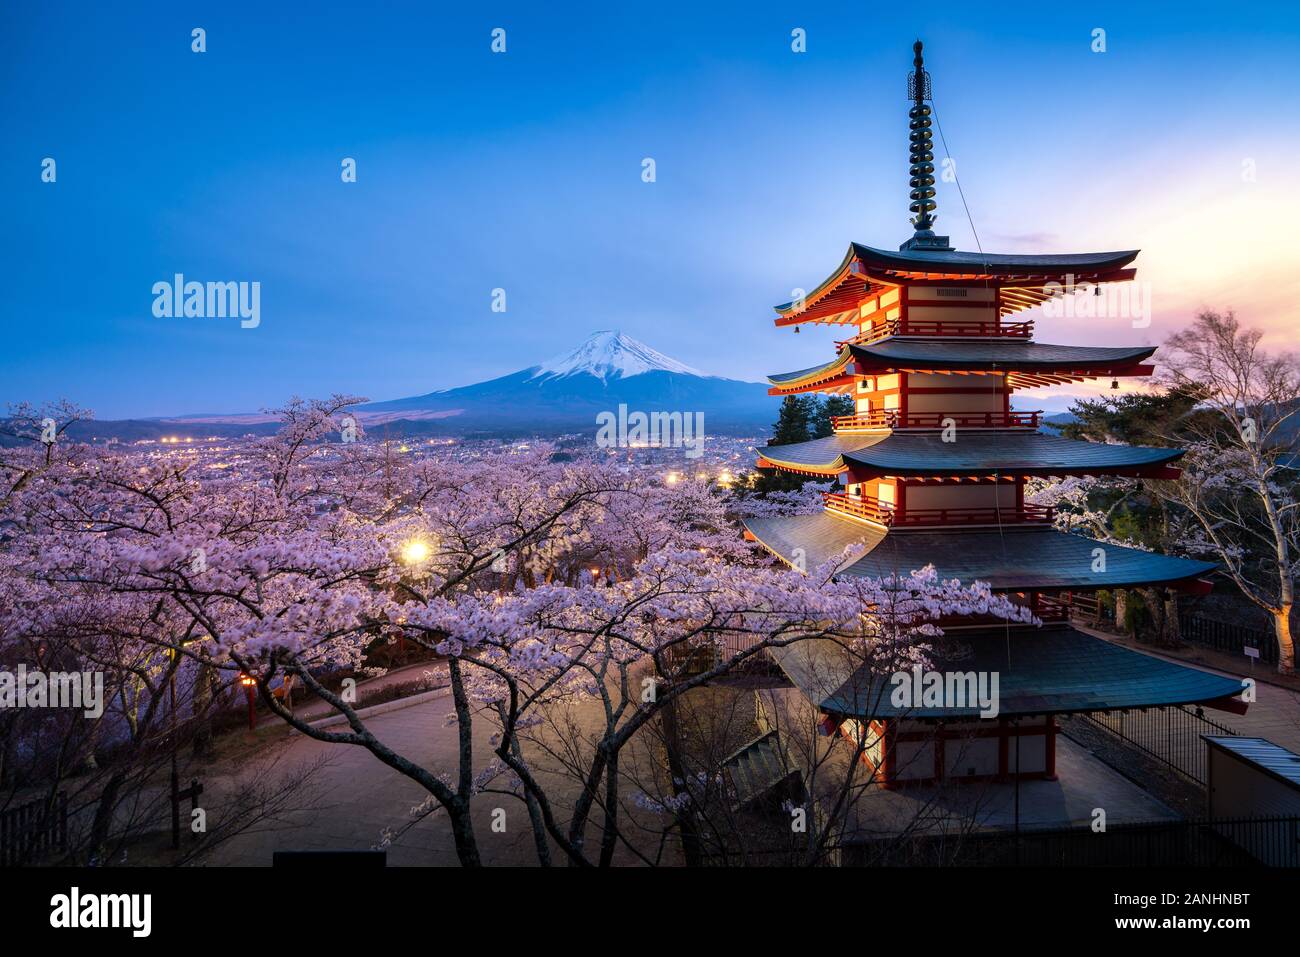 Fujiyoshida, Japan at Chureito Pagoda and Mt. Fuji in the spring with cherry blossoms full bloom during twilight. Japan Landscape and nature travel, o Stock Photo